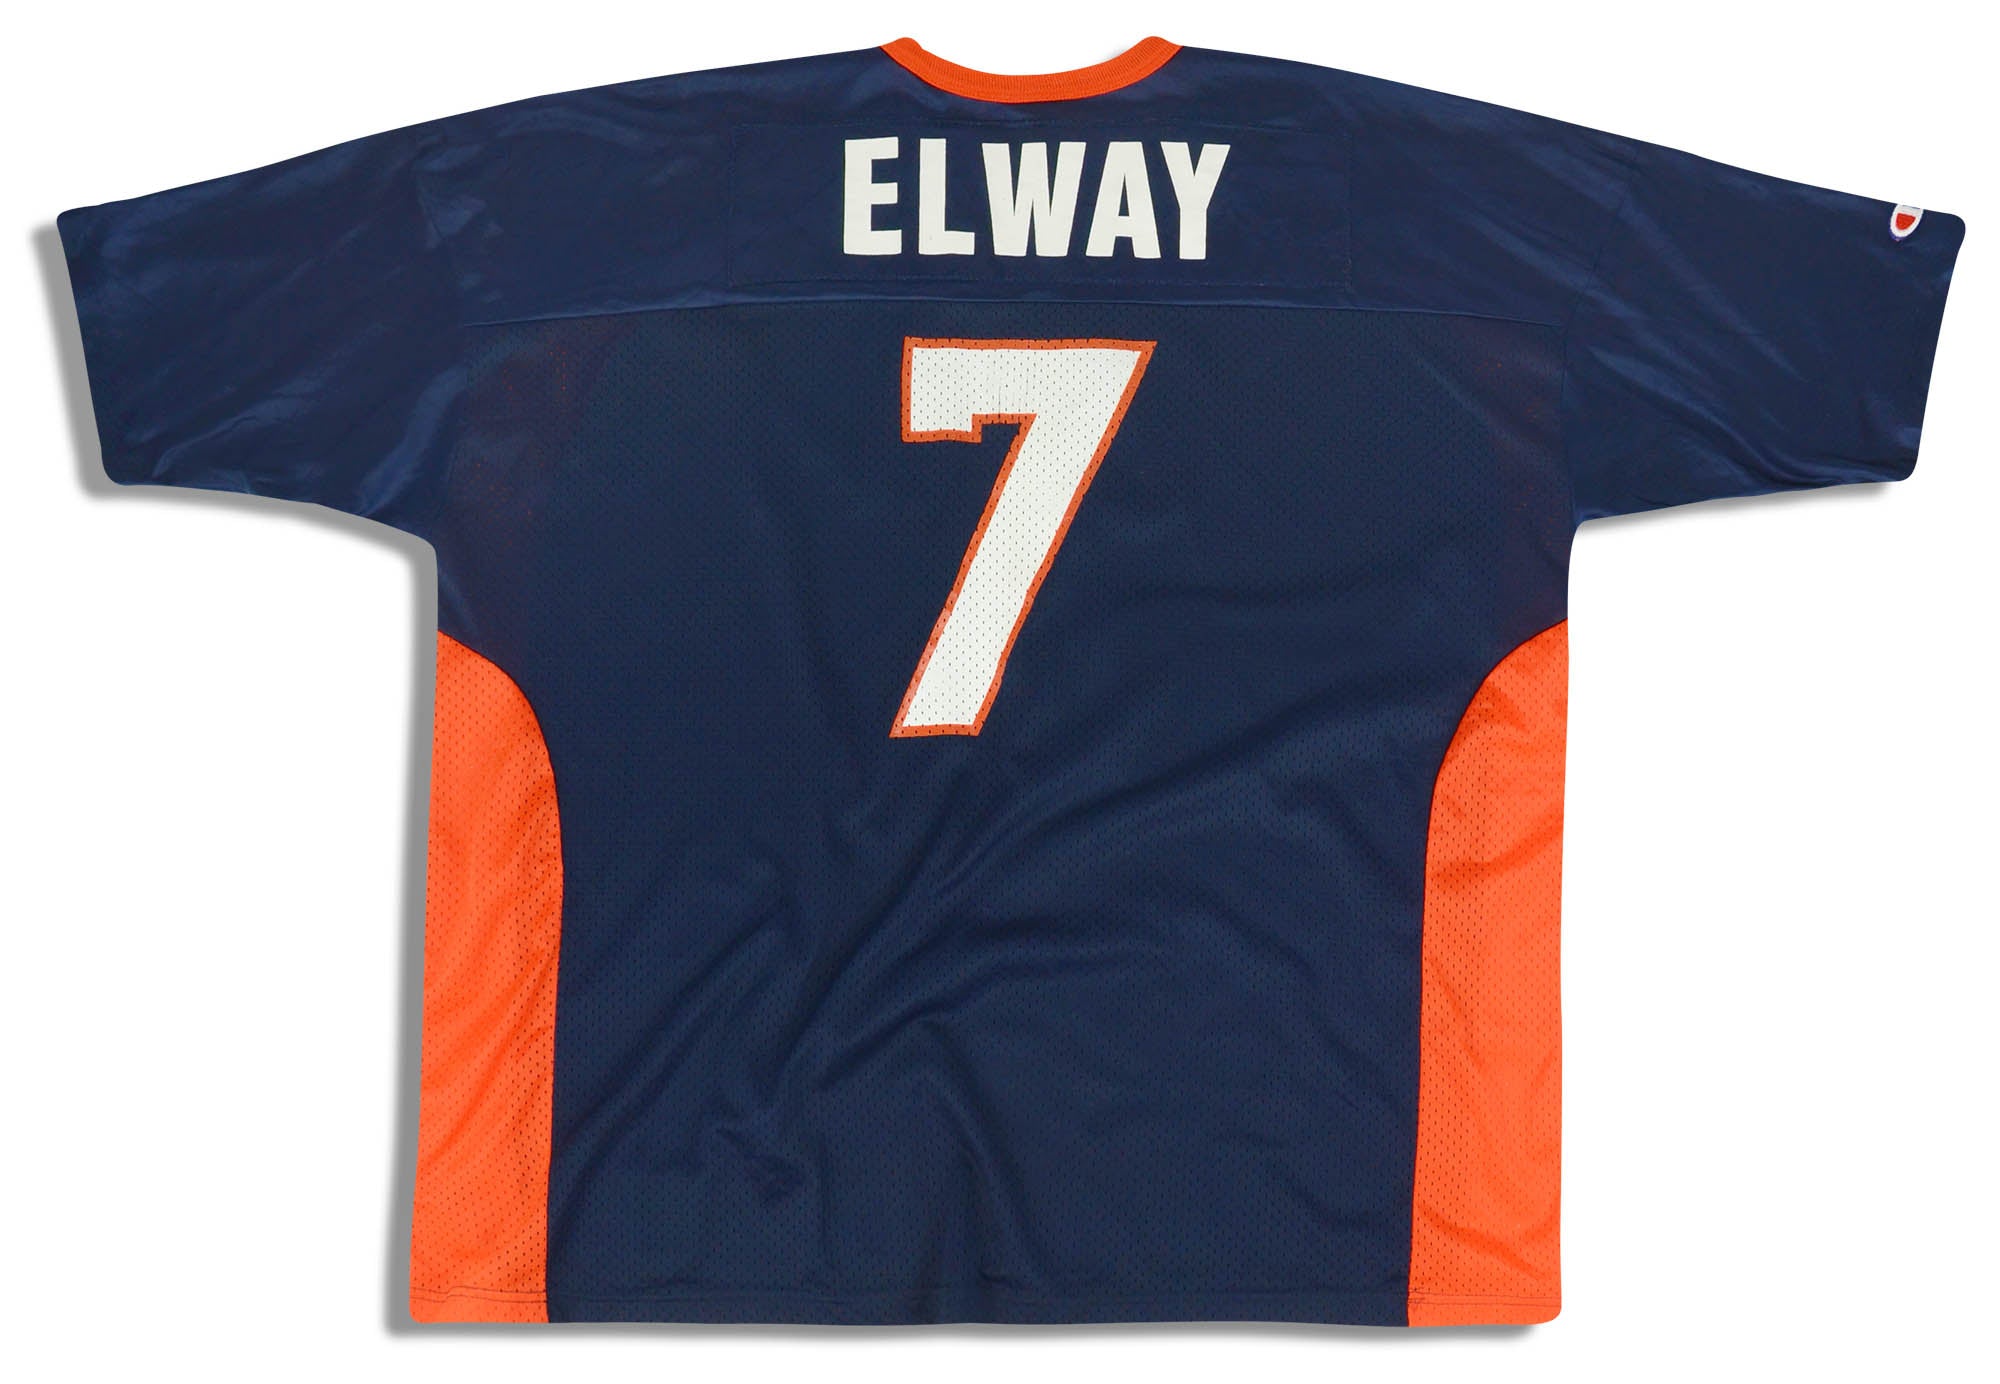 1997-98 DENVER BRONCOS ELWAY #7 CHAMPION JERSEY (HOME) 3XL - Classic  American Sports